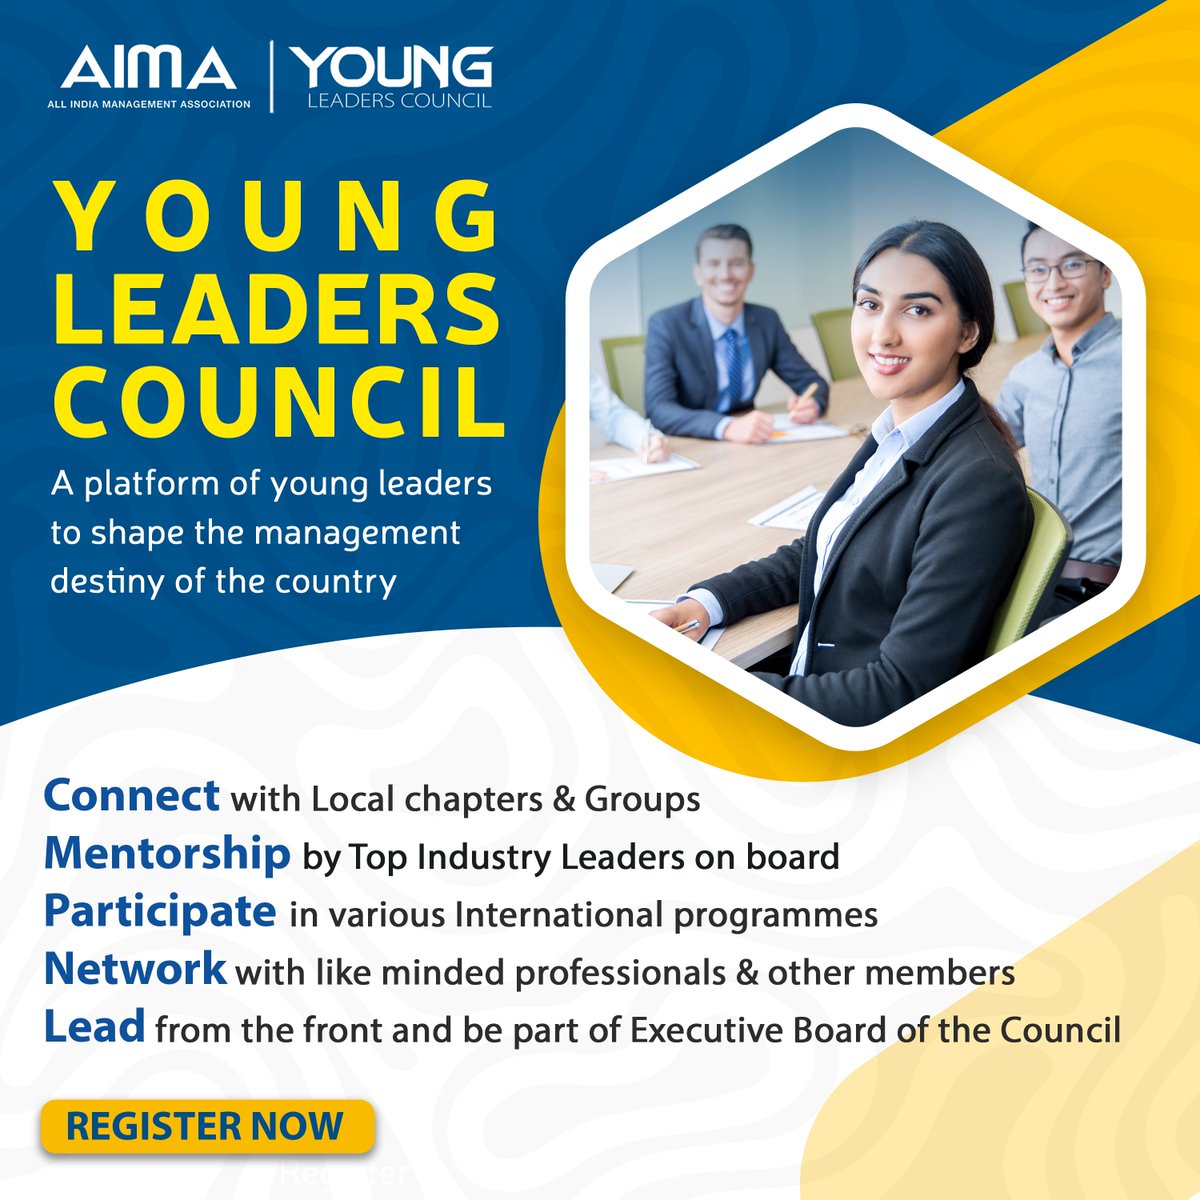 Join AIMA Young Leaders Council (YLC) a group of selected young and dynamic leaders from different walks of life, and network with some of the best minds in the country! Become a member: ylc.aima.in/membership/how…

#YoungLeadersCouncil #YLC #Management #Leadership #Networking